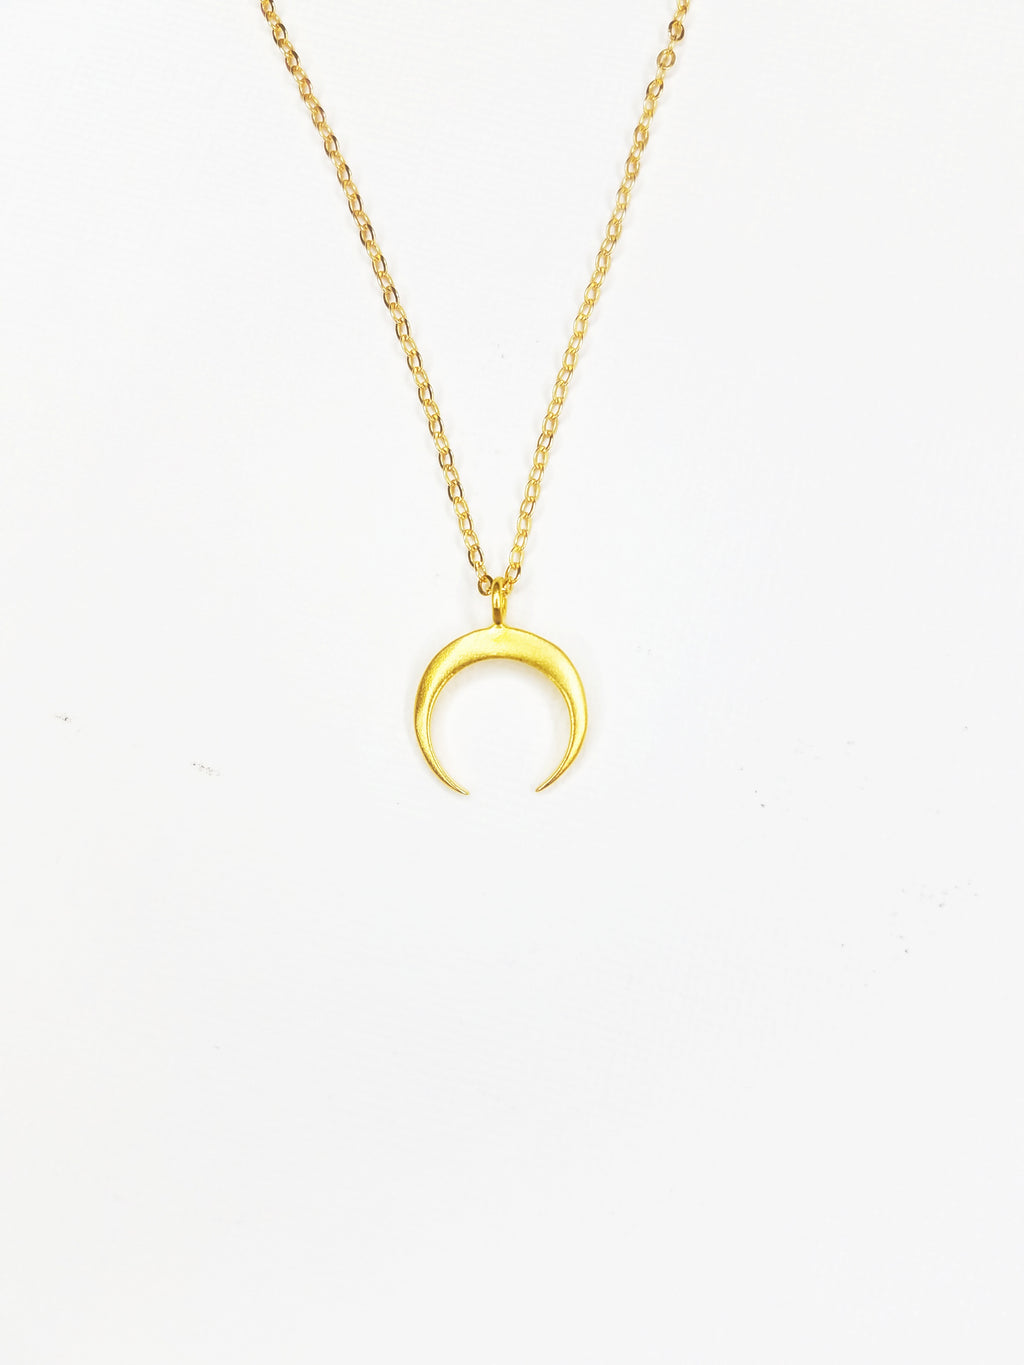 Necklace, gold filled cable chain, Naja crescent moon pendant, gold vermeil. 